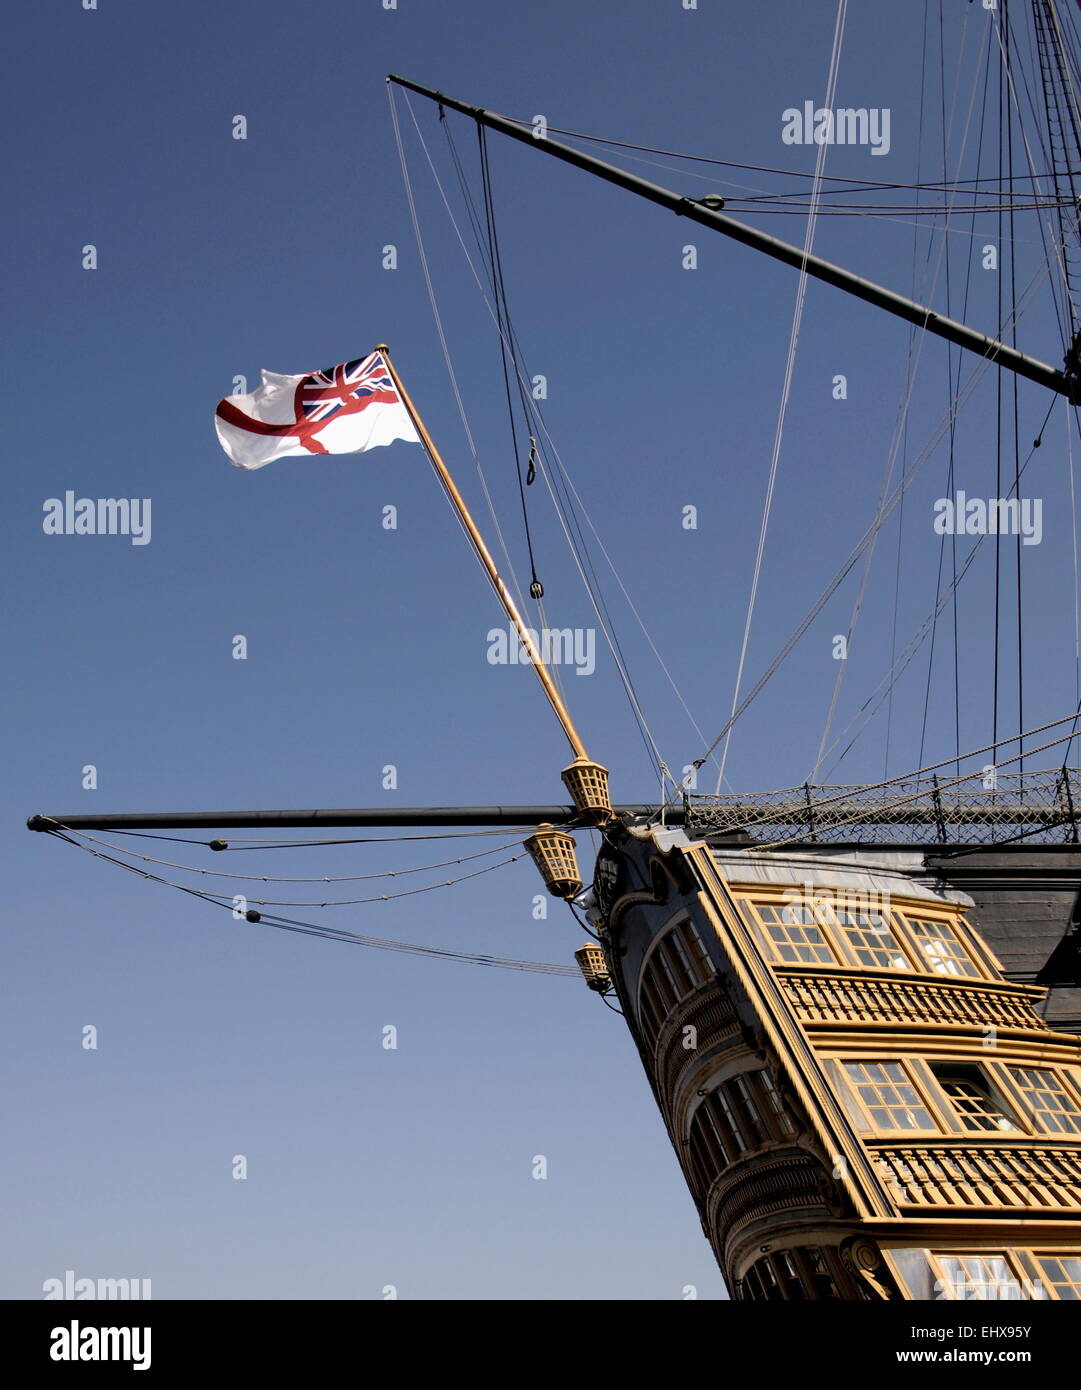 AJAXNETPHOTO. 21ST APRIL, 2011. PORTSMOUTH, ENGLAND. - IN COMMISSION - THE WHITE ENSIGN FLIES FROM THE STERN OF NELSON'S FLAGSHIP H.M.S.VICTORY. PHOTO:JONATHAN EASTLAND/AJAX REF:D112104 1237 Stock Photo